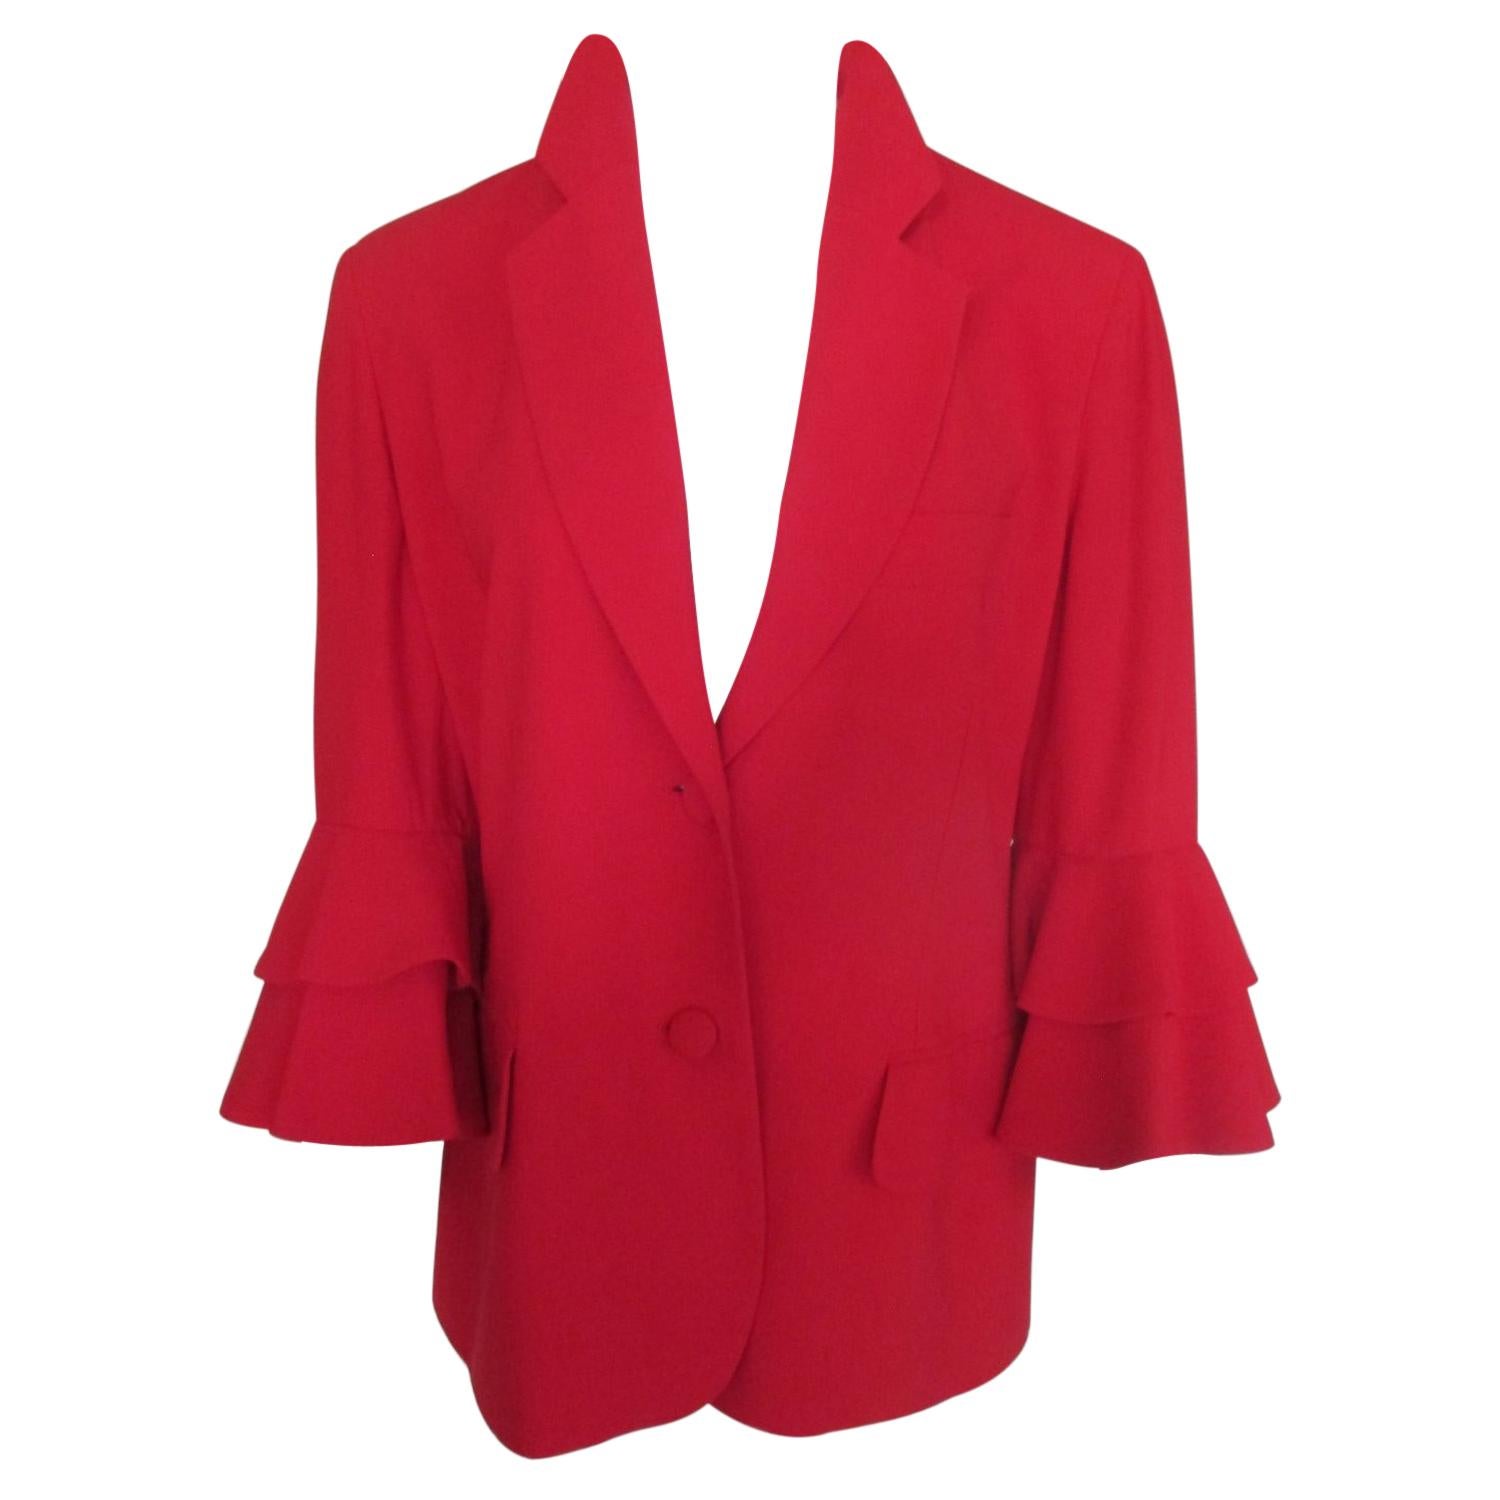 Moschino Couture! Repetita Juvant Red Blazer Jacket For Sale